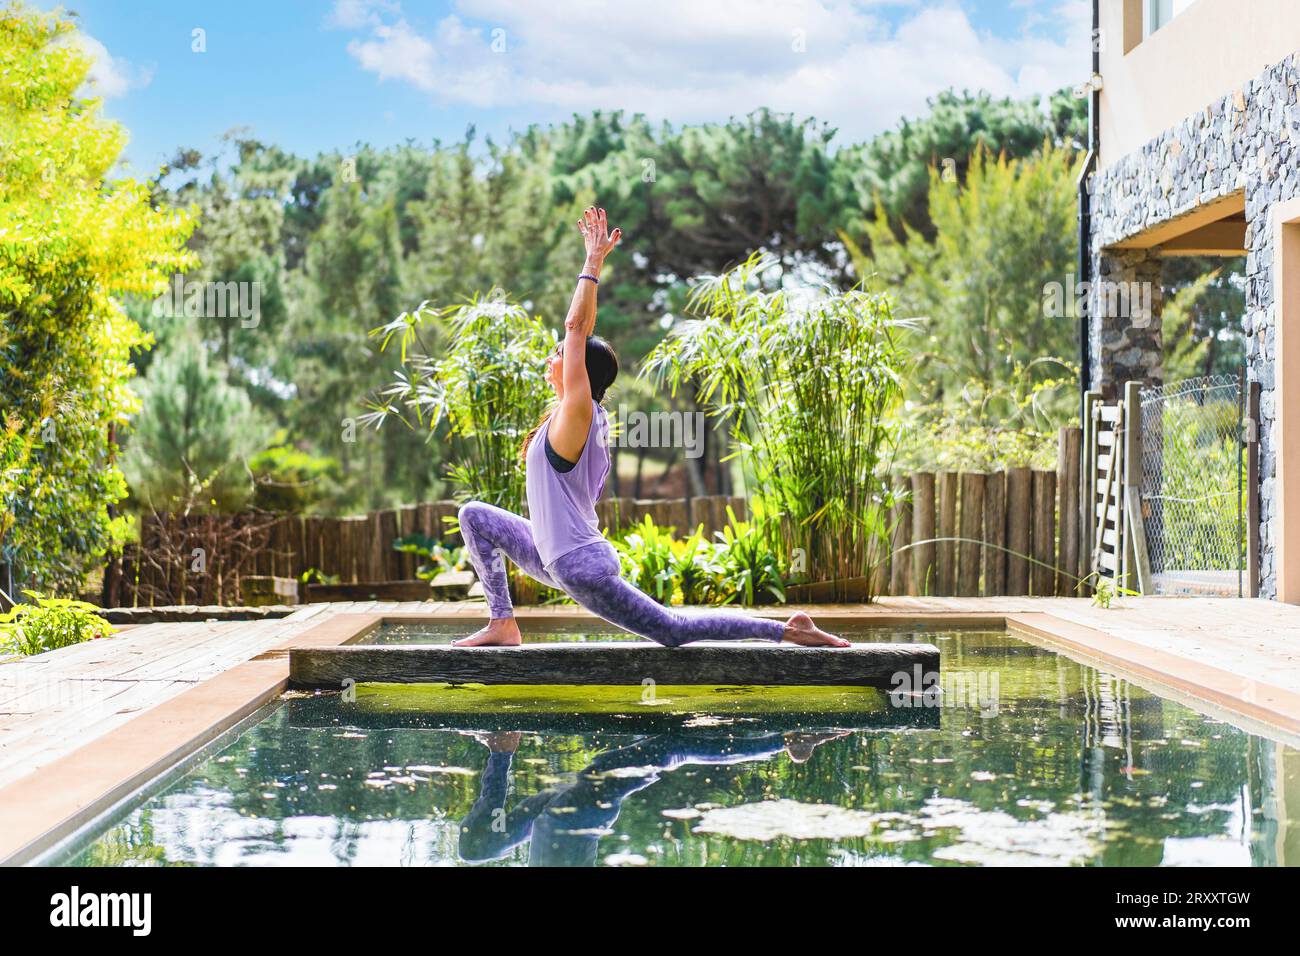 A woman practicing the yoga pose Crescent Lunge on the Knee (Anjaneyasana) Stock Photo